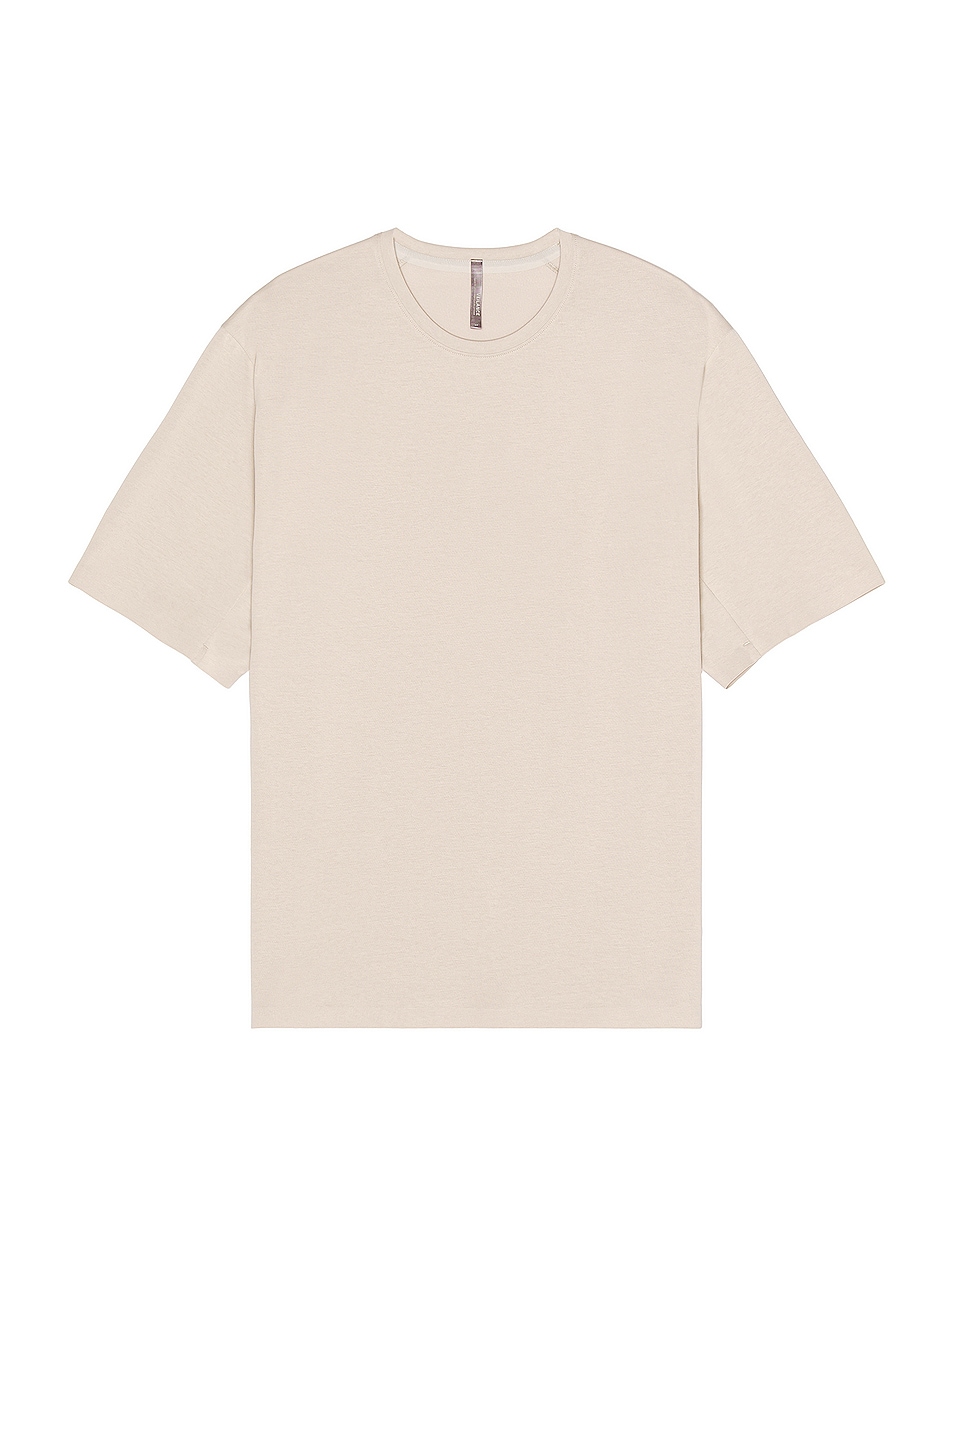 Image 1 of Veilance Ionic Tee in Sanddust